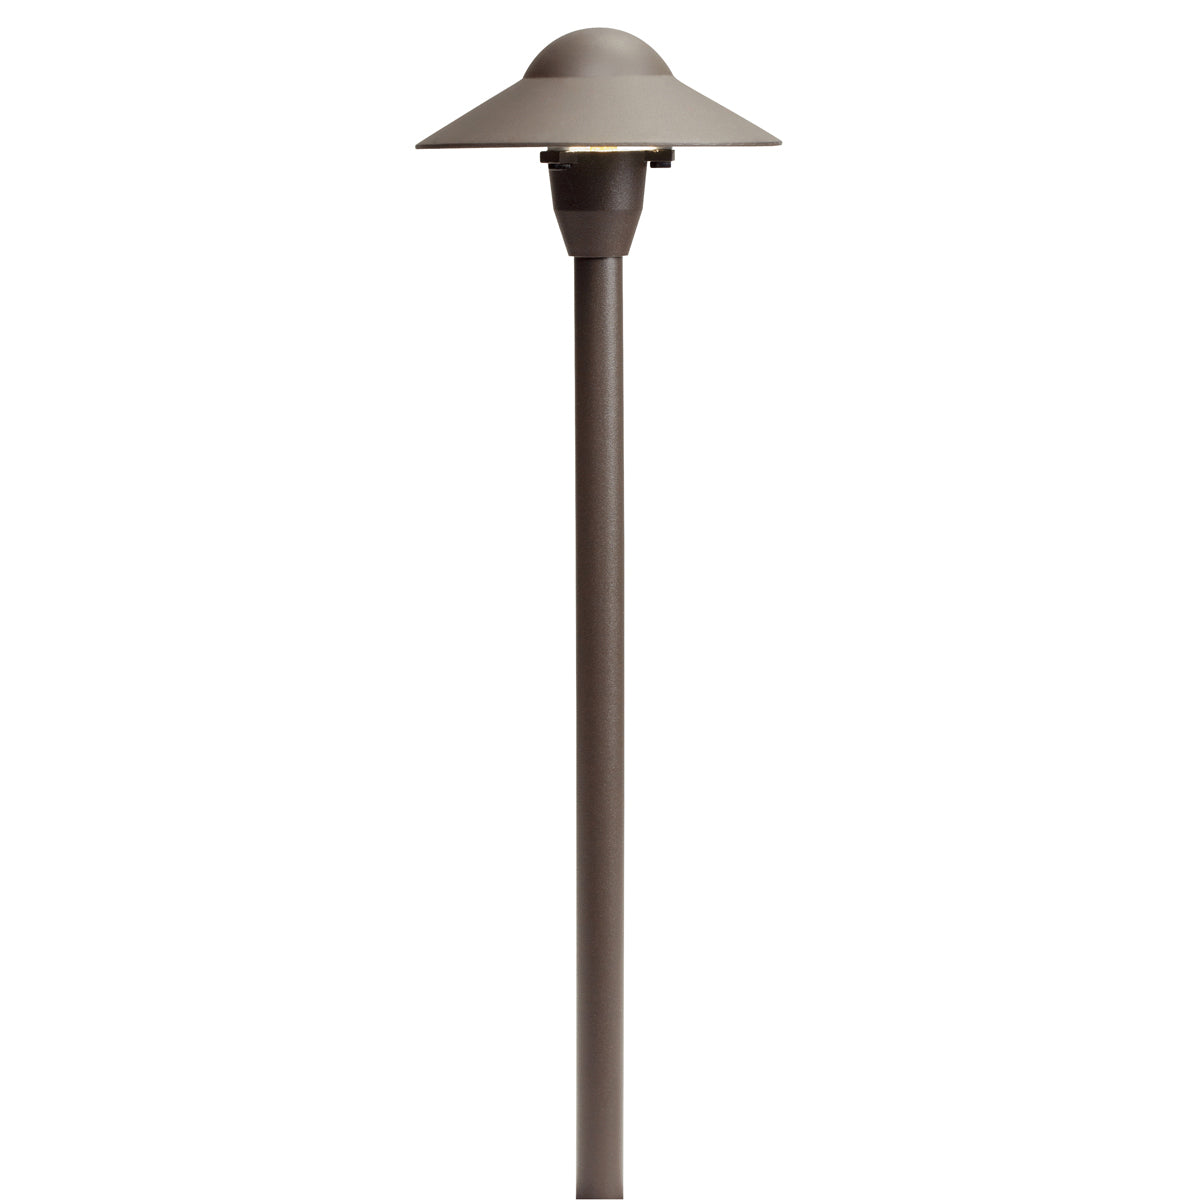 6" Dome Path Light - Lamps Expo